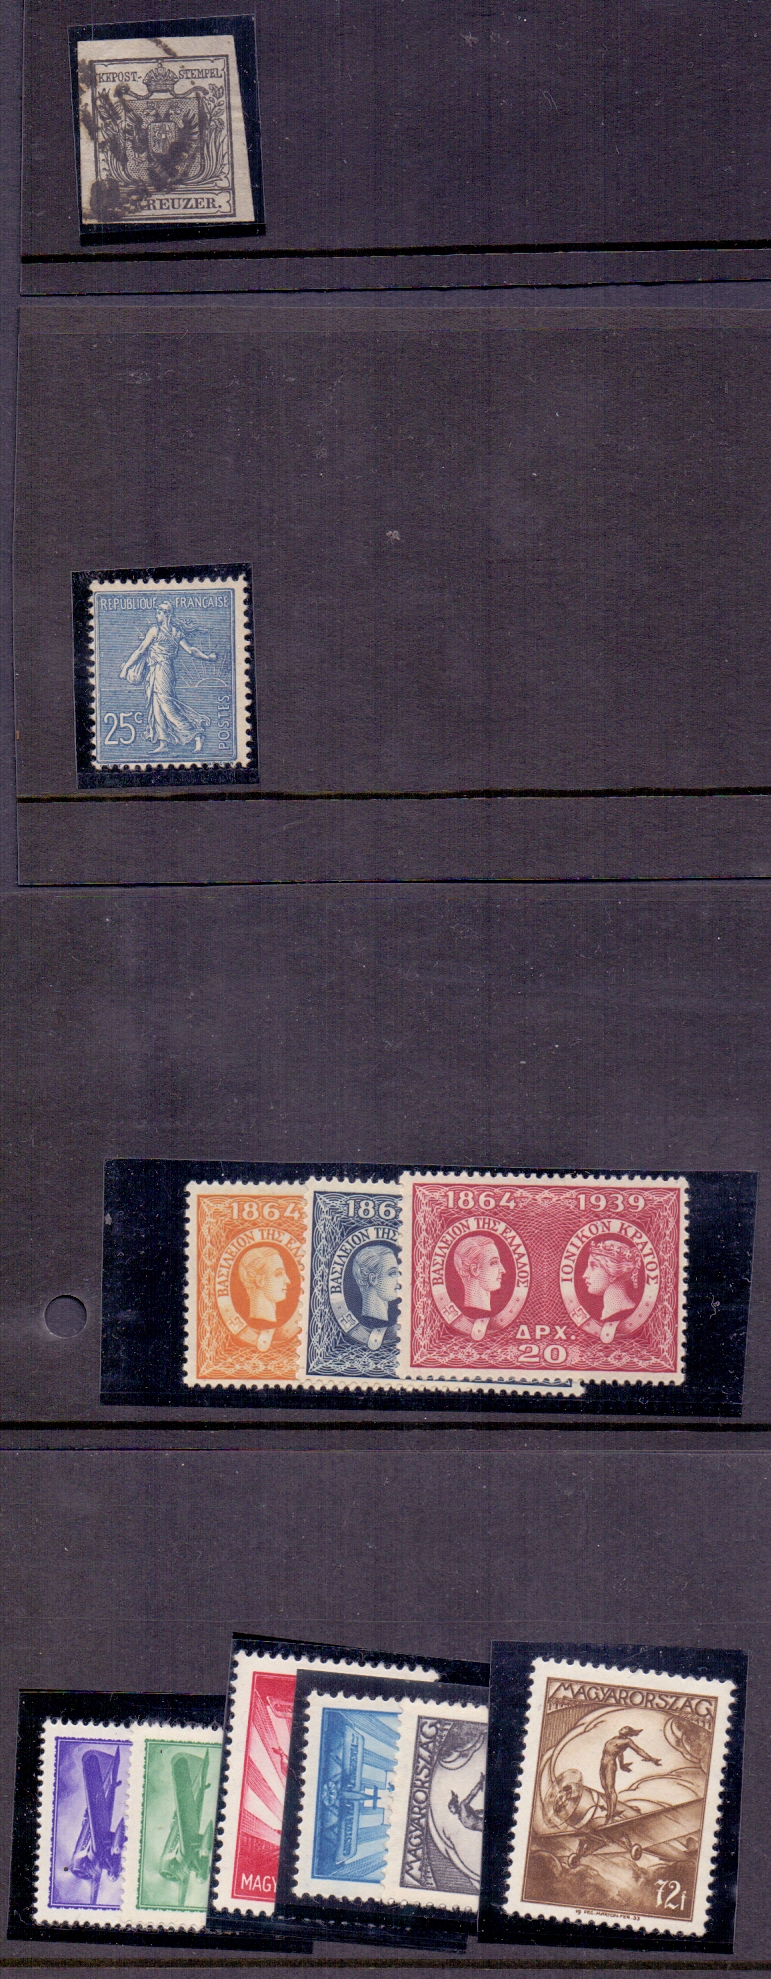 STAMPS : Europe better single items mint - Image 2 of 2